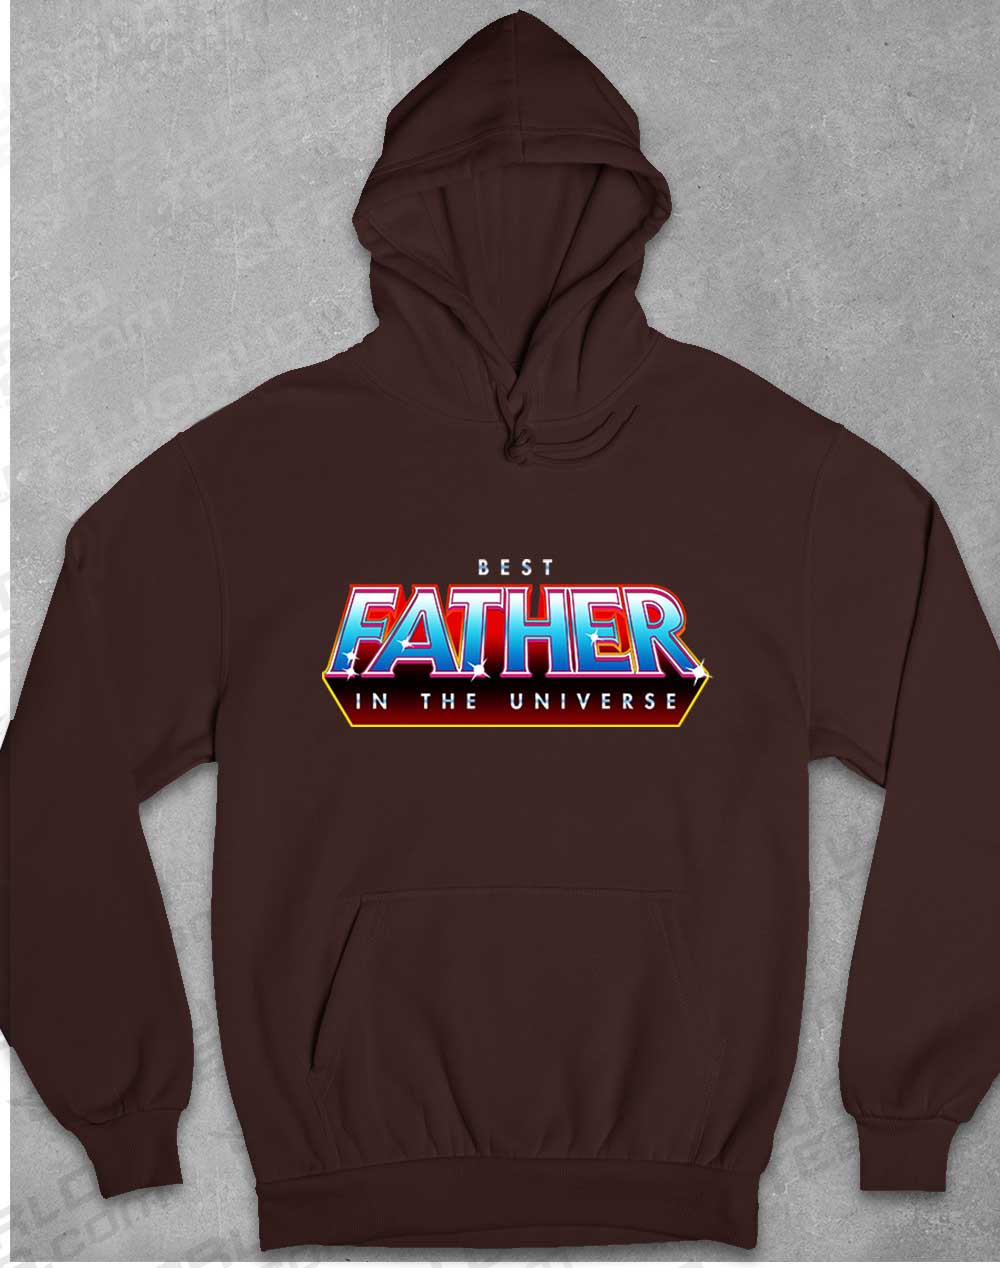 Hot Chocolate - Best Father in the Universe Hoodie